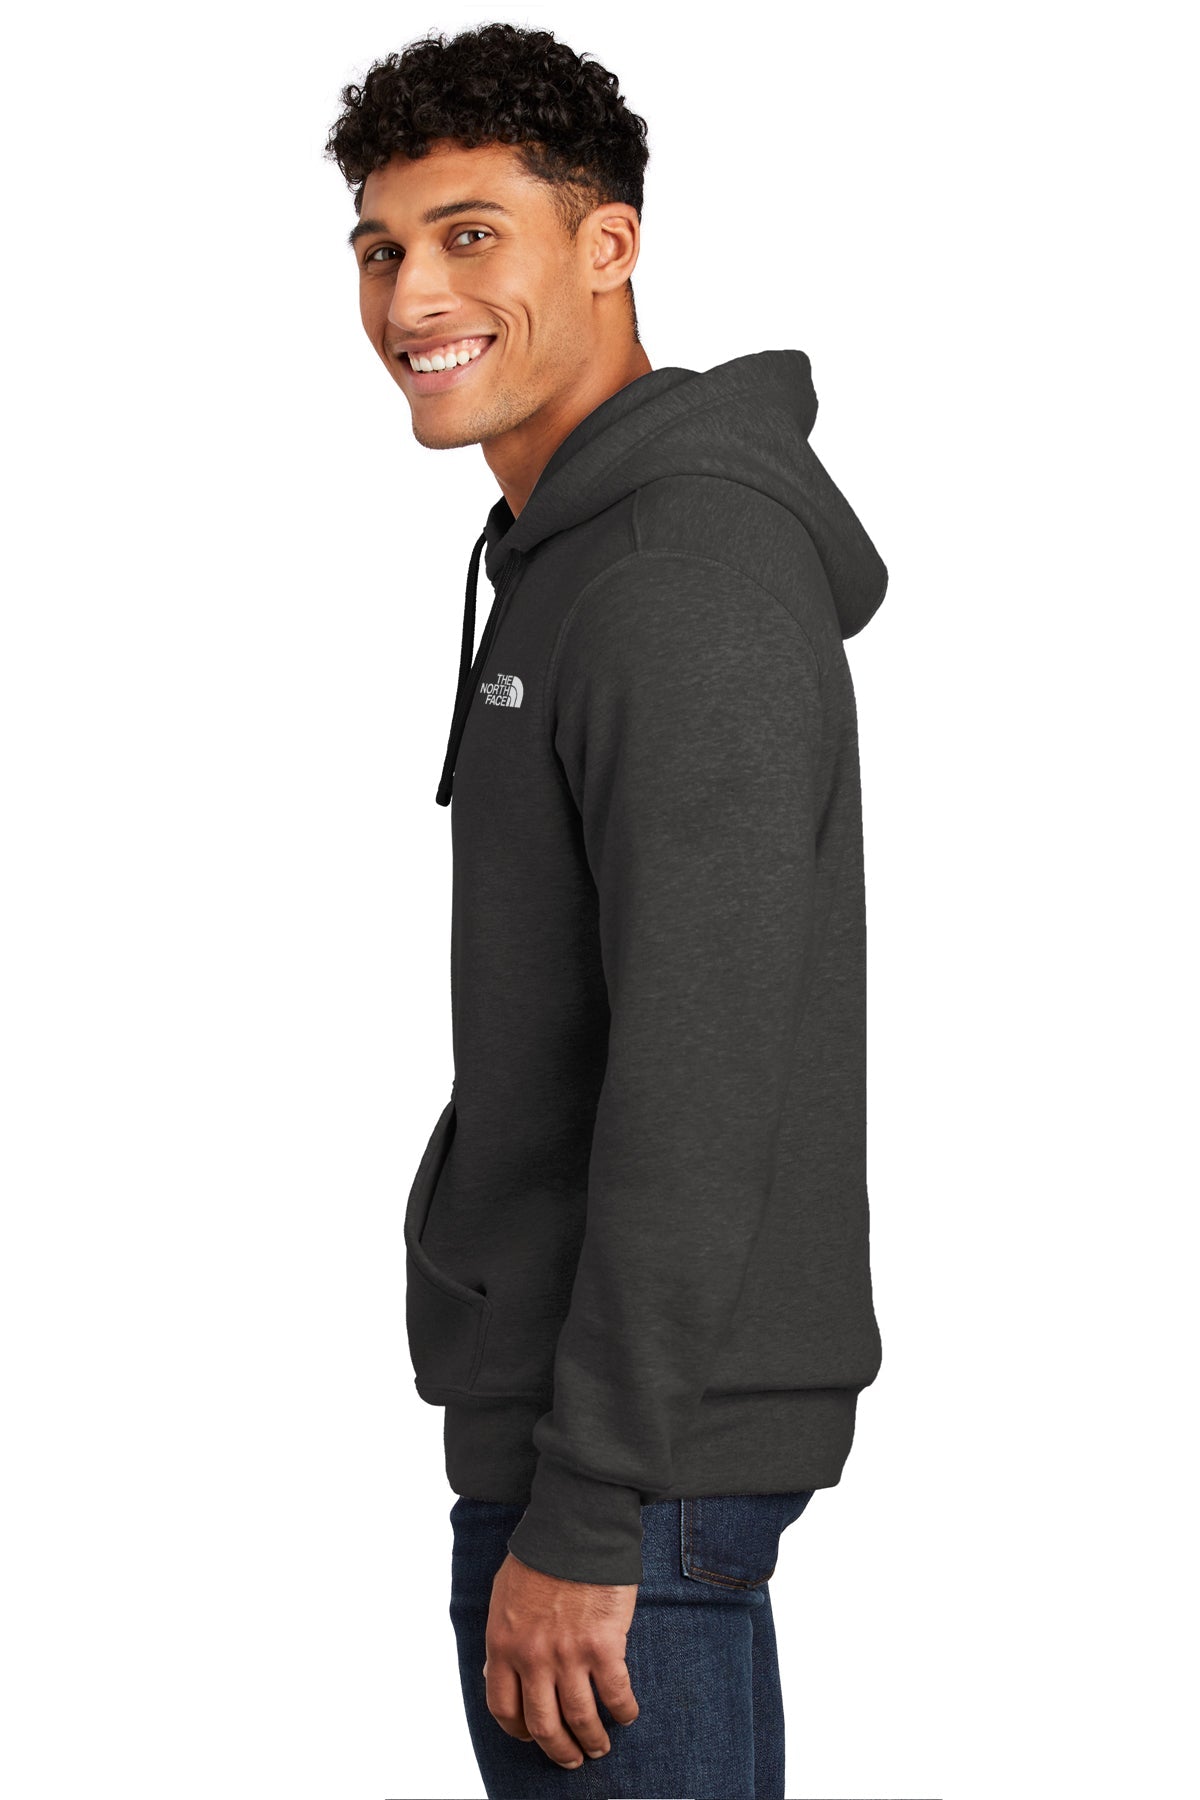 North Face Chest Logo Hoodie NF0A7V9B TNF Black Heather